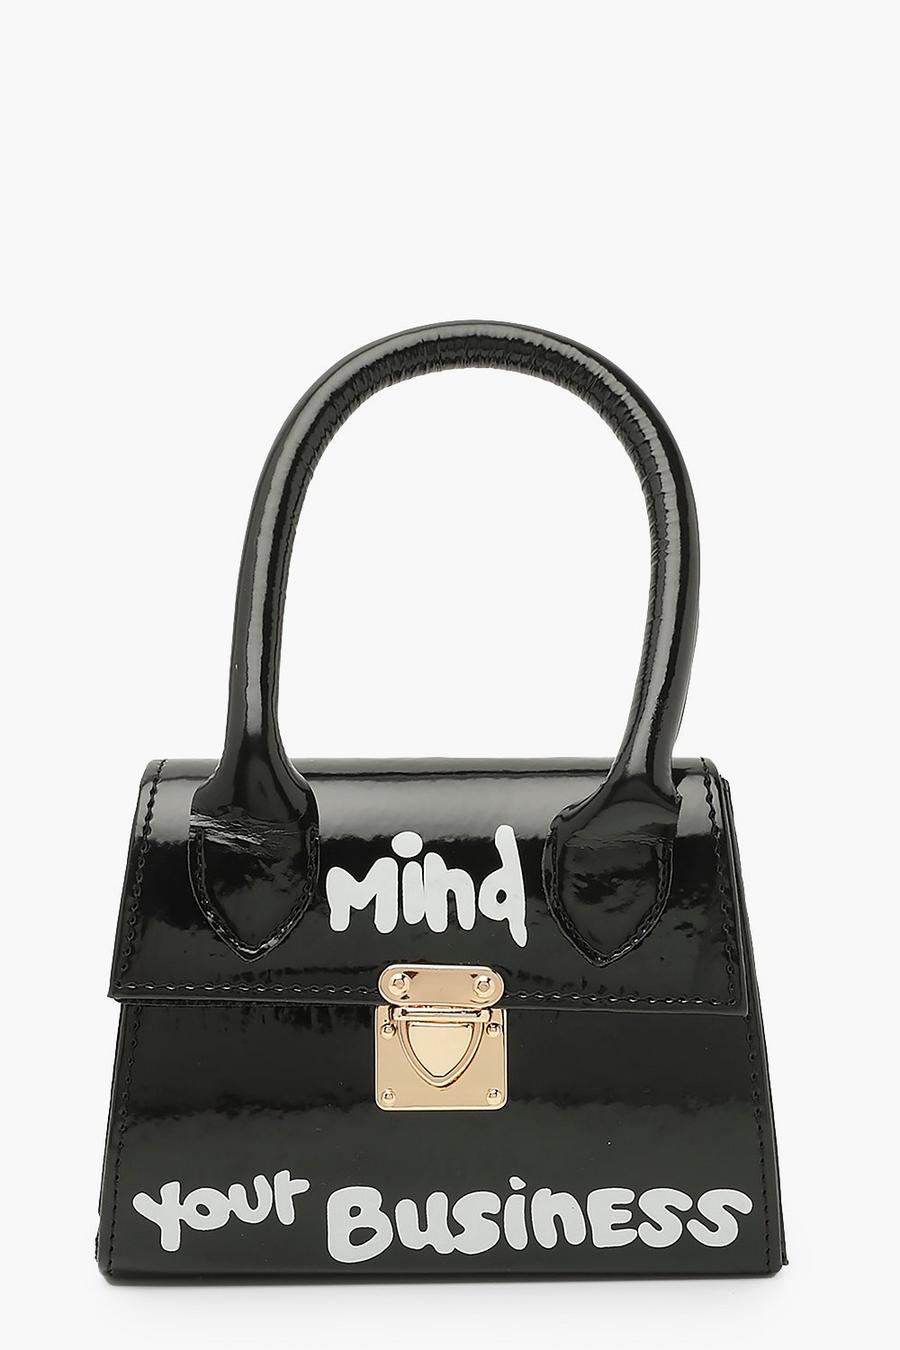 Minibolso con eslogan Mind Your Business, Negro image number 1